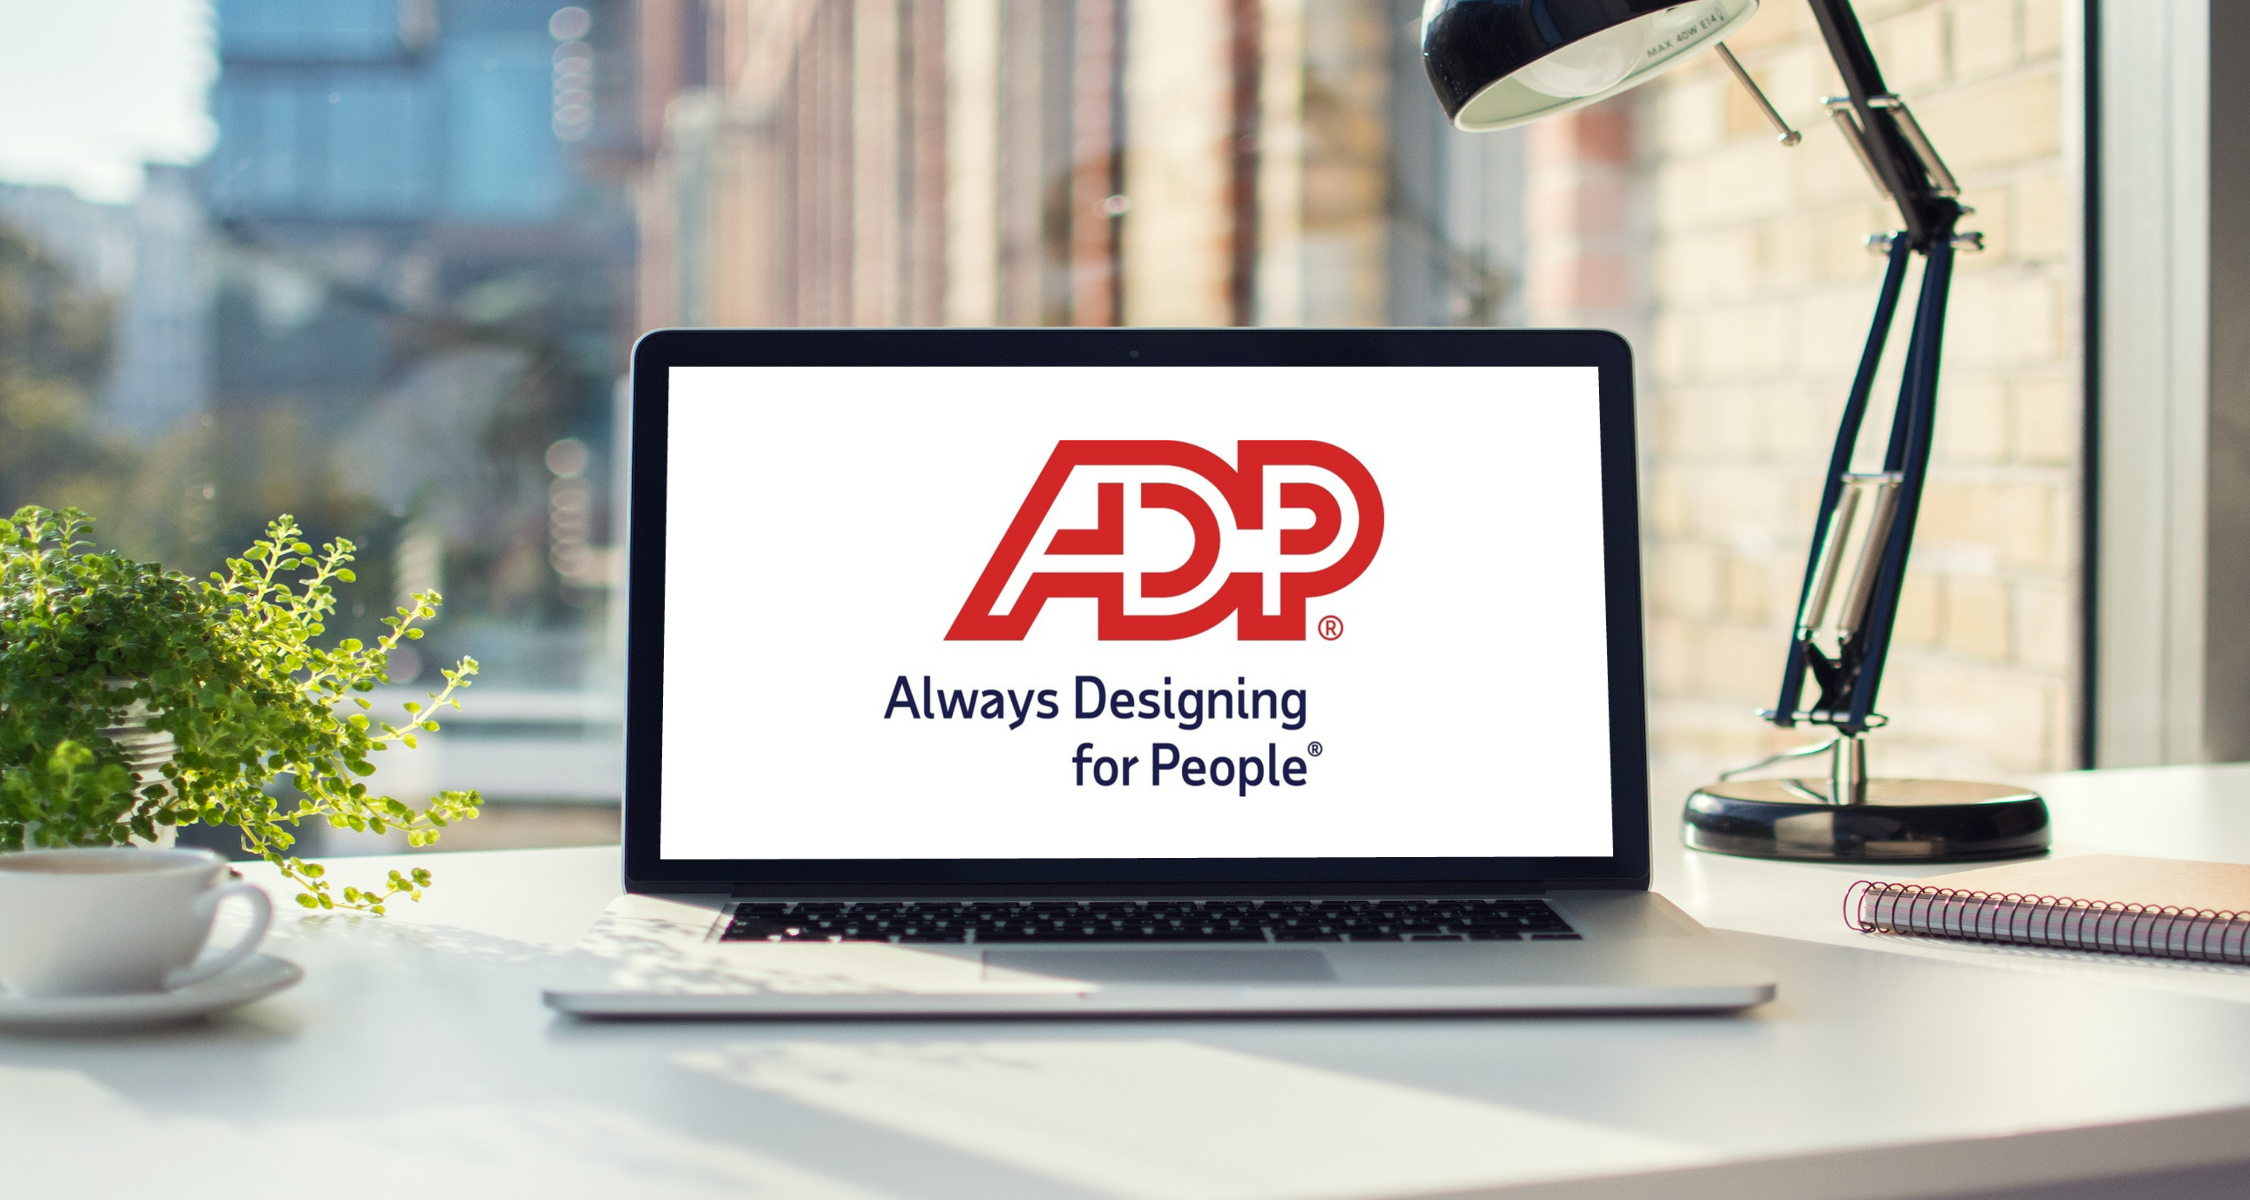 A laptop displaying the ADP logo sits on a desk in front of a sunny window